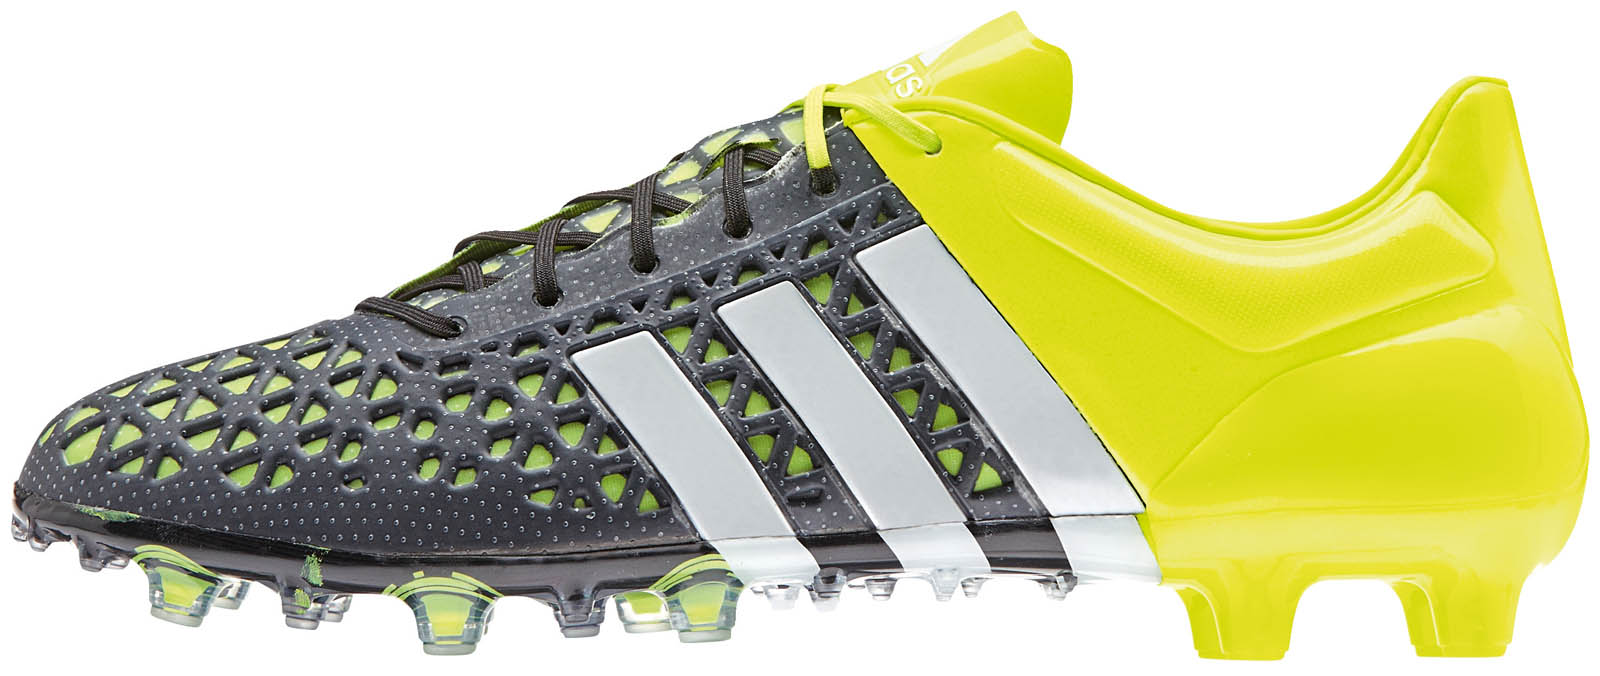 Adidas Ace 15.1 Boots - Who Will Wear Them?